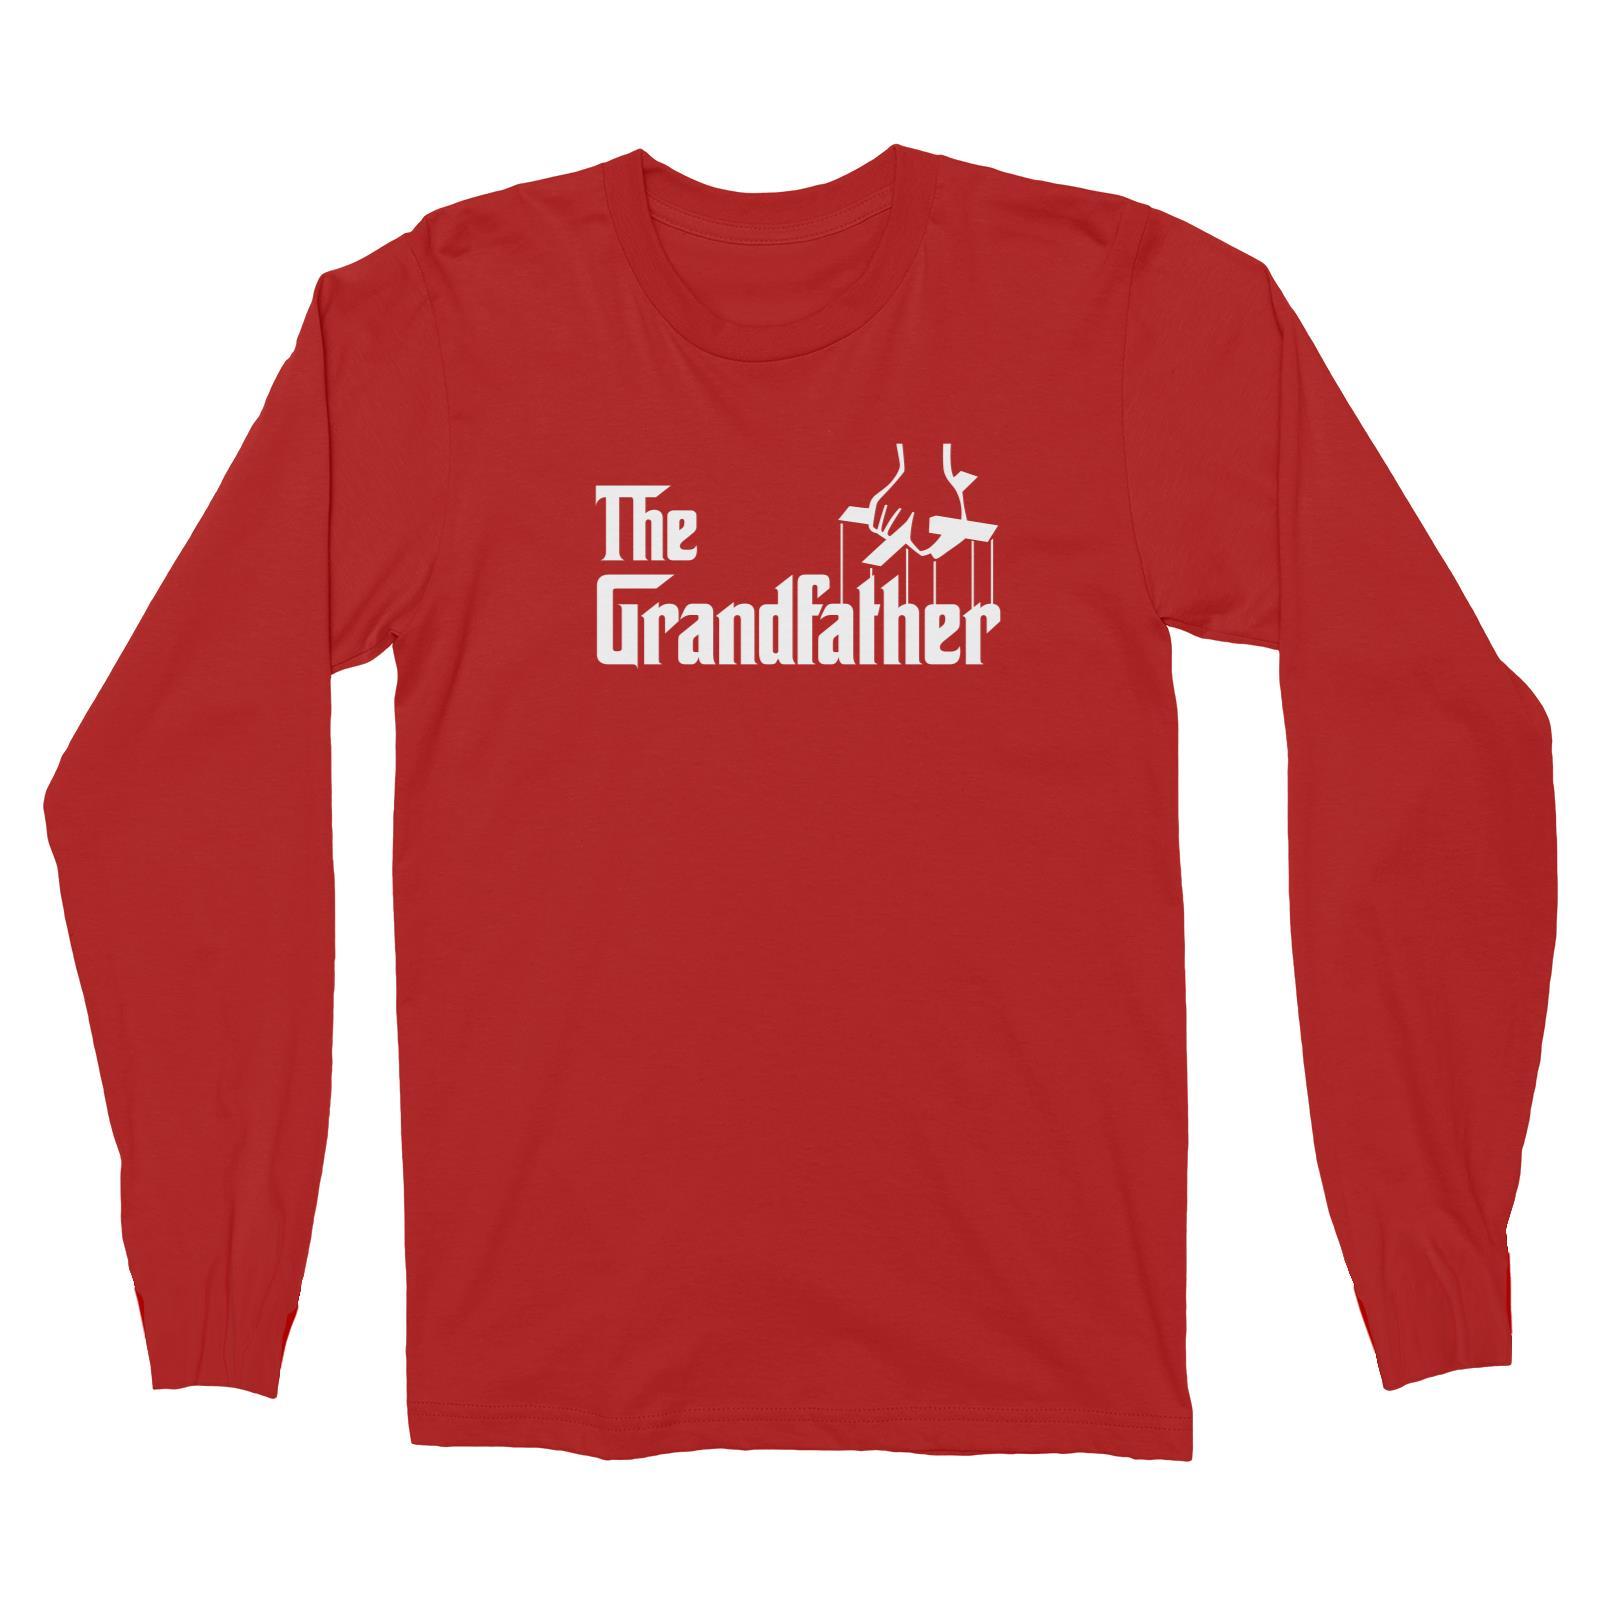 The Grandfather Long Sleeve Unisex T-Shirt Godfather Matching Family